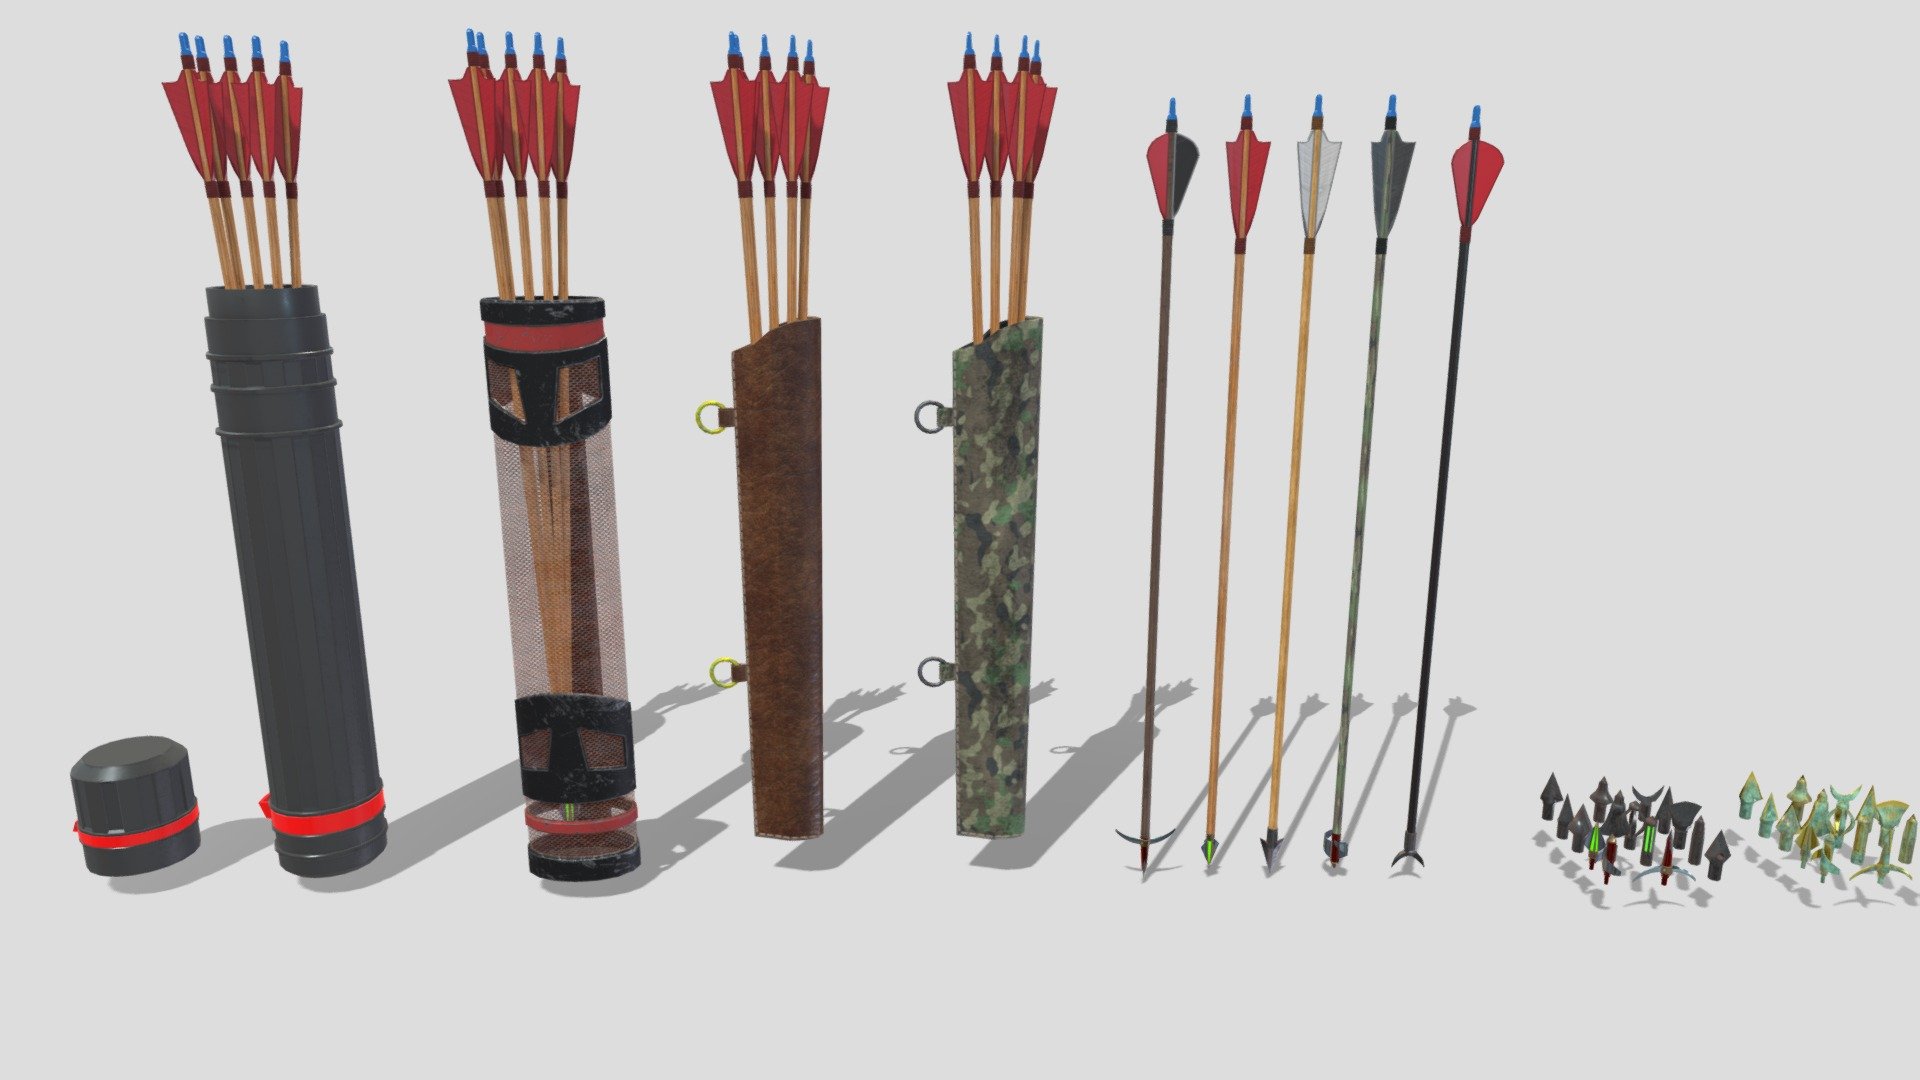 Game use! The arrow shaft and arrow can be replaced at will. Each feather can be individually changed in color,

Stickers 2048

With attached original file package

Here are some bows and arrows1：https://sketchfab.com/3d-models/bowandarrow2-f18cb38a20874194b100e4af40ee99ad

Here are some bows and arrows2：https://sketchfab.com/3d-models/bowandarrow3-33a1f9d9c4f1460f9b8db4a2da4b34a0

Here are some bows and arrows3：https://sketchfab.com/3d-models/bowandarrow5-525394901f154f09943951b15377a006

Here are some bows and arrows4：https://sketchfab.com/3d-models/bowandarrow6-76c0a75357334b62acf31a8b8c79701c

Here are some bows and arrows5：https://sketchfab.com/3d-models/bowandarrow4-26888ea60880434e94ec561be624f86d

Here are some bows and arrows6：https://sketchfab.com/3d-models/bowandarrow-1-f1baa9ab3a114aa38ba1ca4bdb8cc07d
 - arrow - Buy Royalty Free 3D model by Lu Long zhang (@zhanglulong55) 3d model